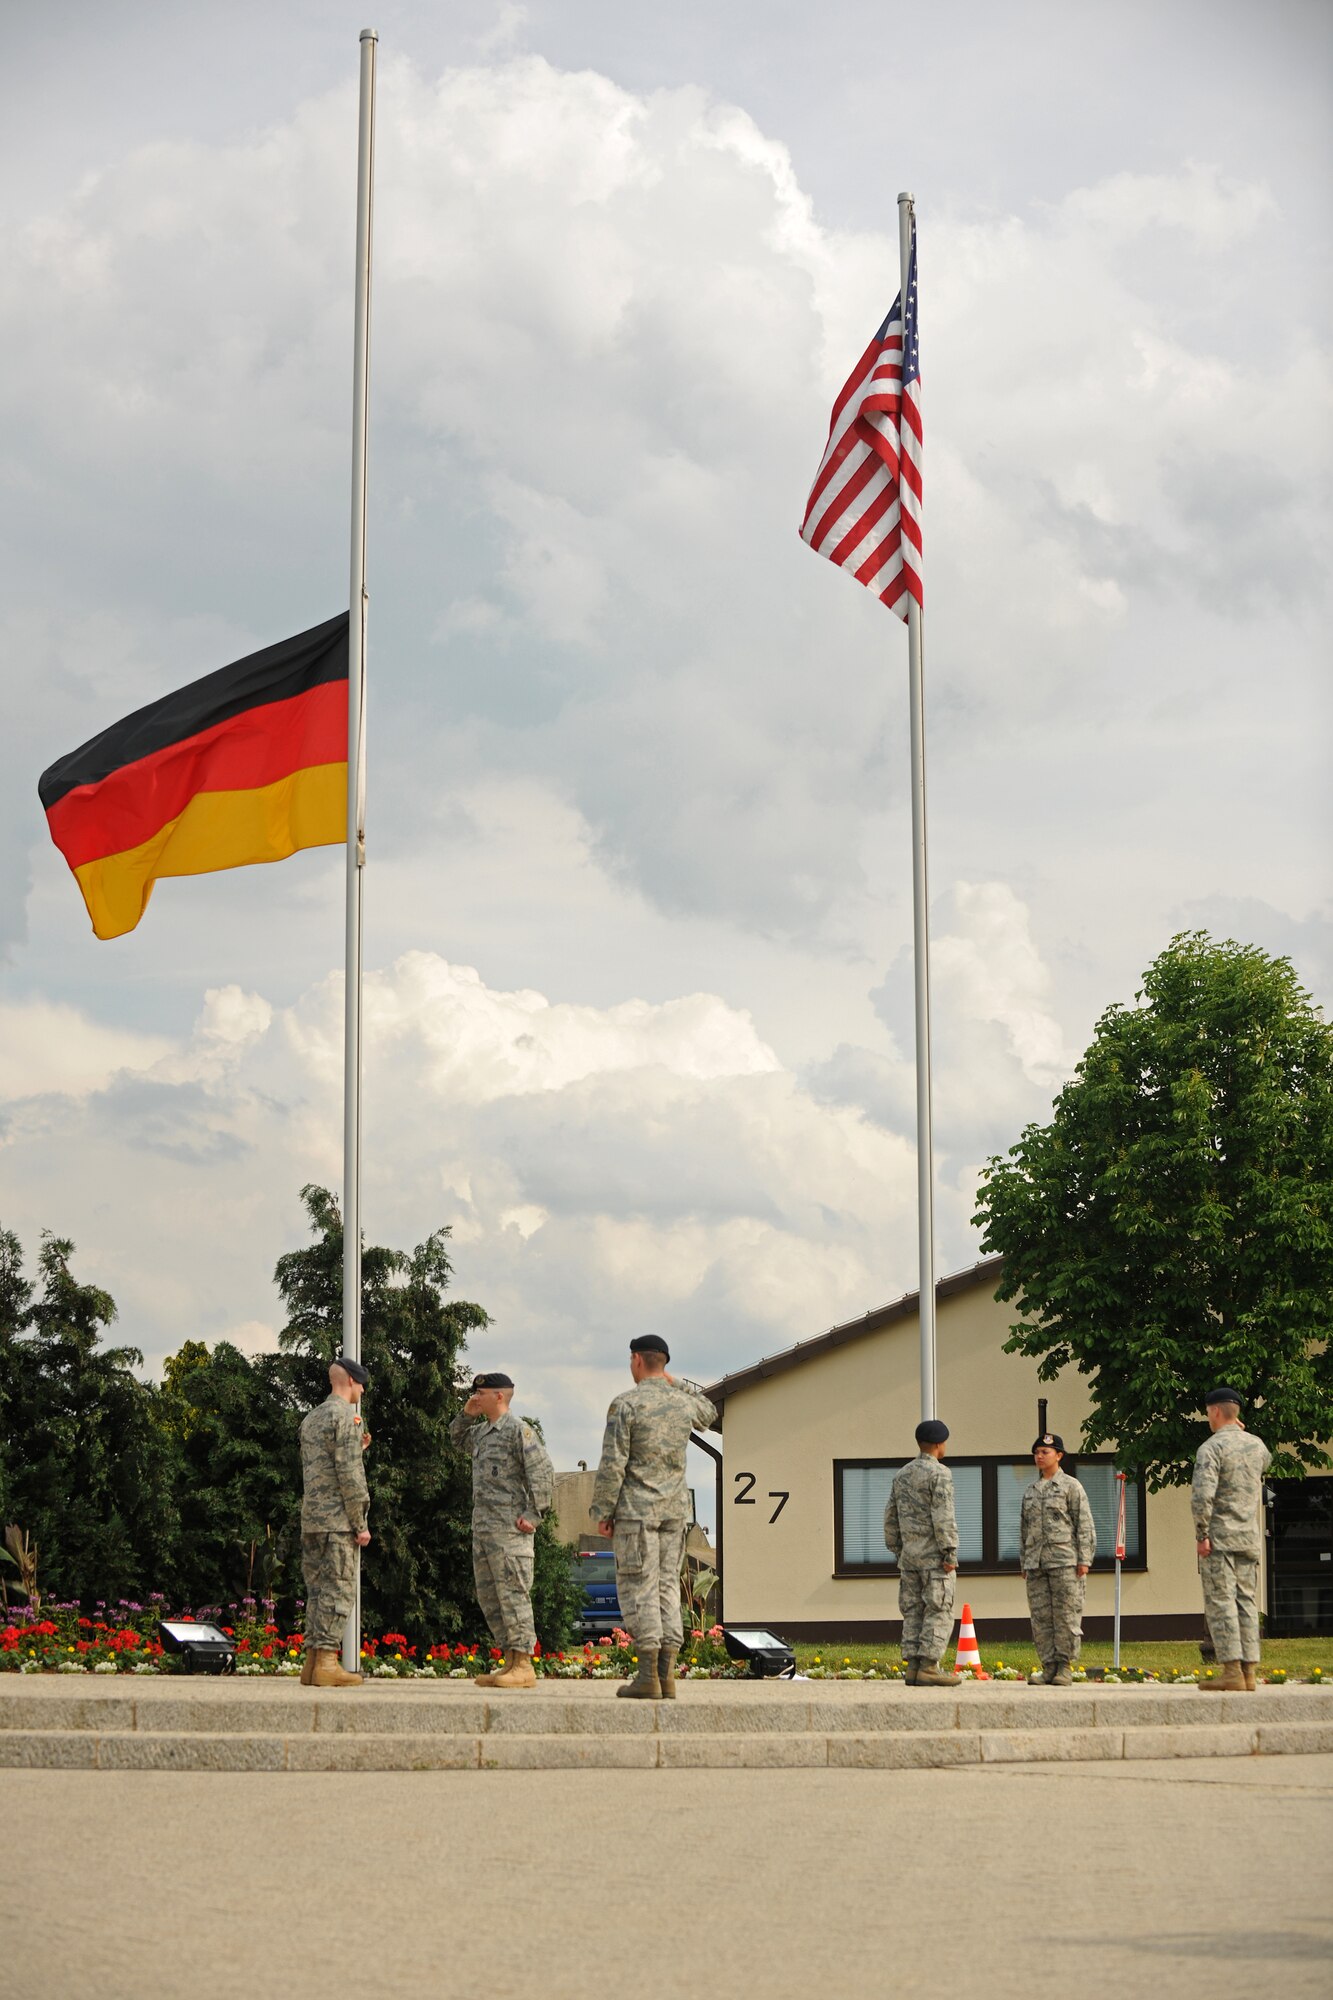 SPANGDAHLEM AIR BASE, Germany – Airmen from the 52nd Security Forces Squadron lower the German flag during a retreat ceremony here May 20. The retreat ceremony coincided with National Police Week, which honors law enforcement members who have lost their lives in the line of duty for the safety and protection of others. (U.S. Air Force photo/Senior Airman Nathanael Callon)